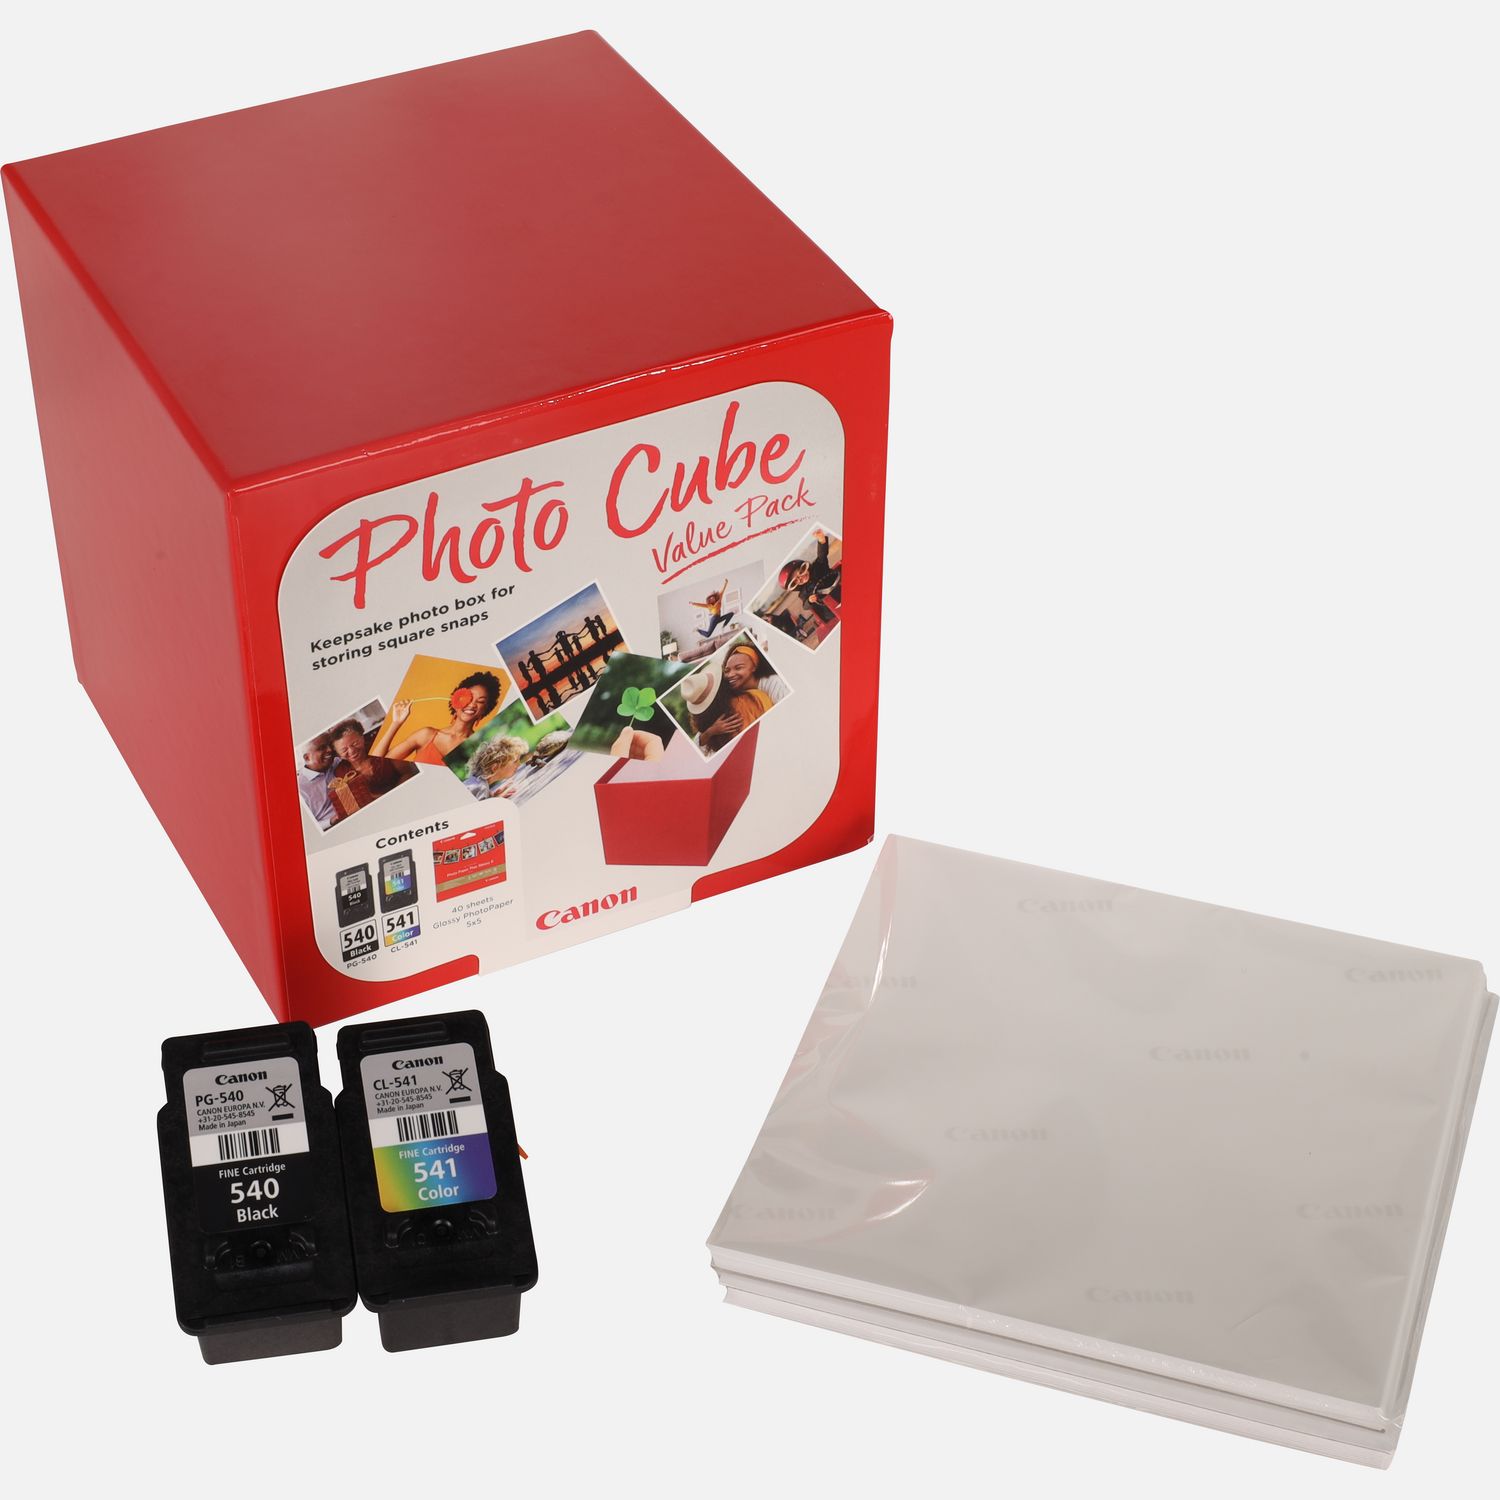 Canon Photo Cube PG-540 + CL-541 Ink Cartridges + PP-201 5 x 5" Photo Paper Plus Glossy II (40 sheets) - Value Pack — Canon Ireland Store